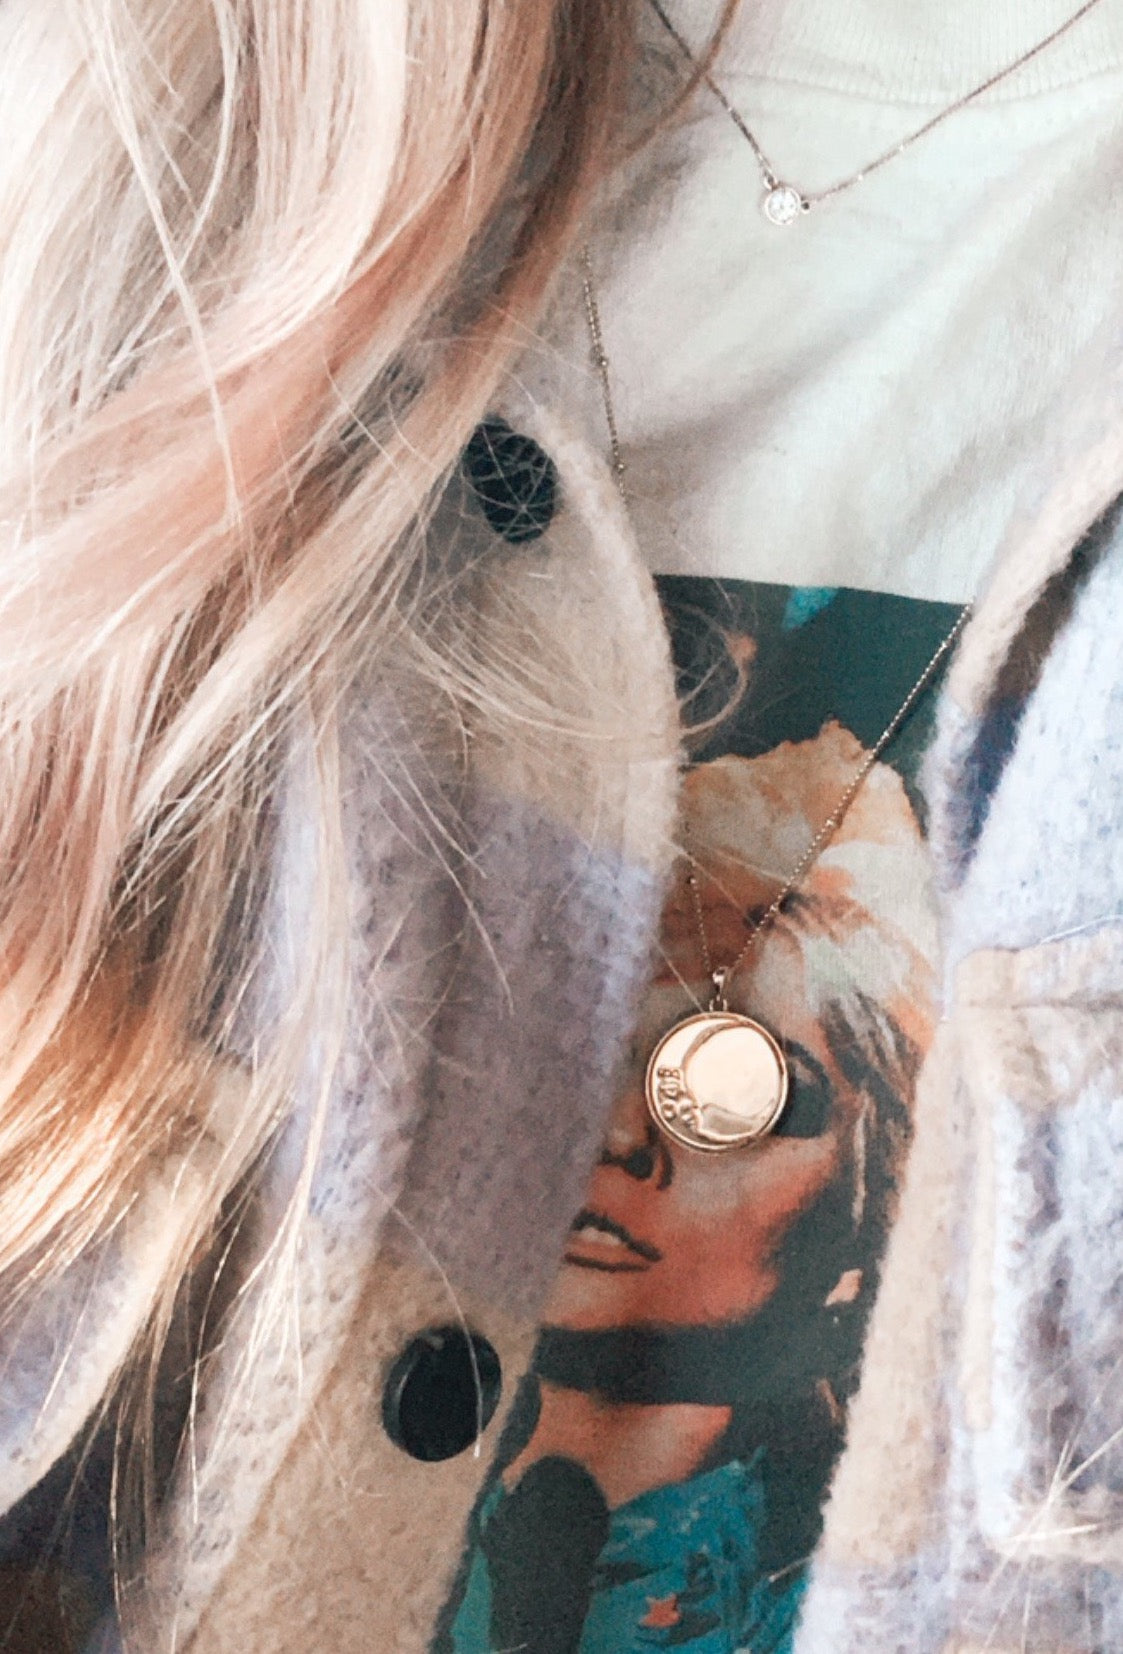 Moon Child Pendant Necklace in Gold